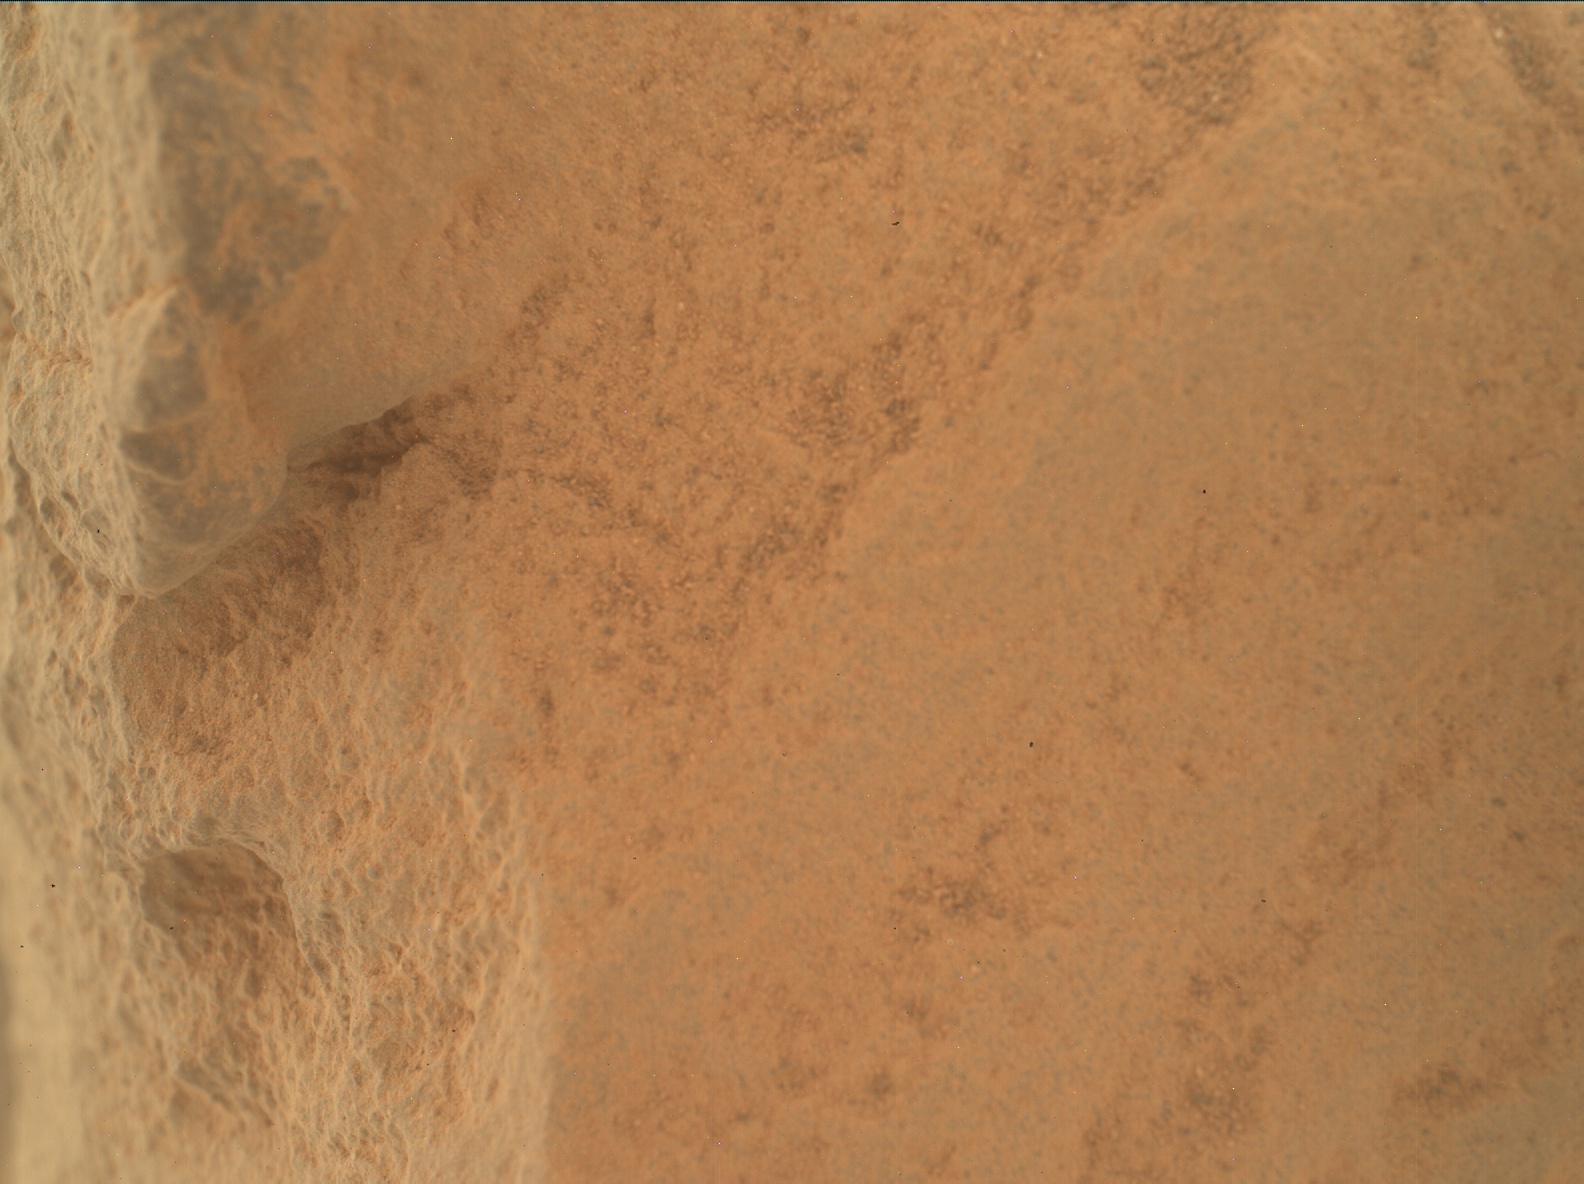 Nasa's Mars rover Curiosity acquired this image using its Mars Hand Lens Imager (MAHLI) on Sol 3444